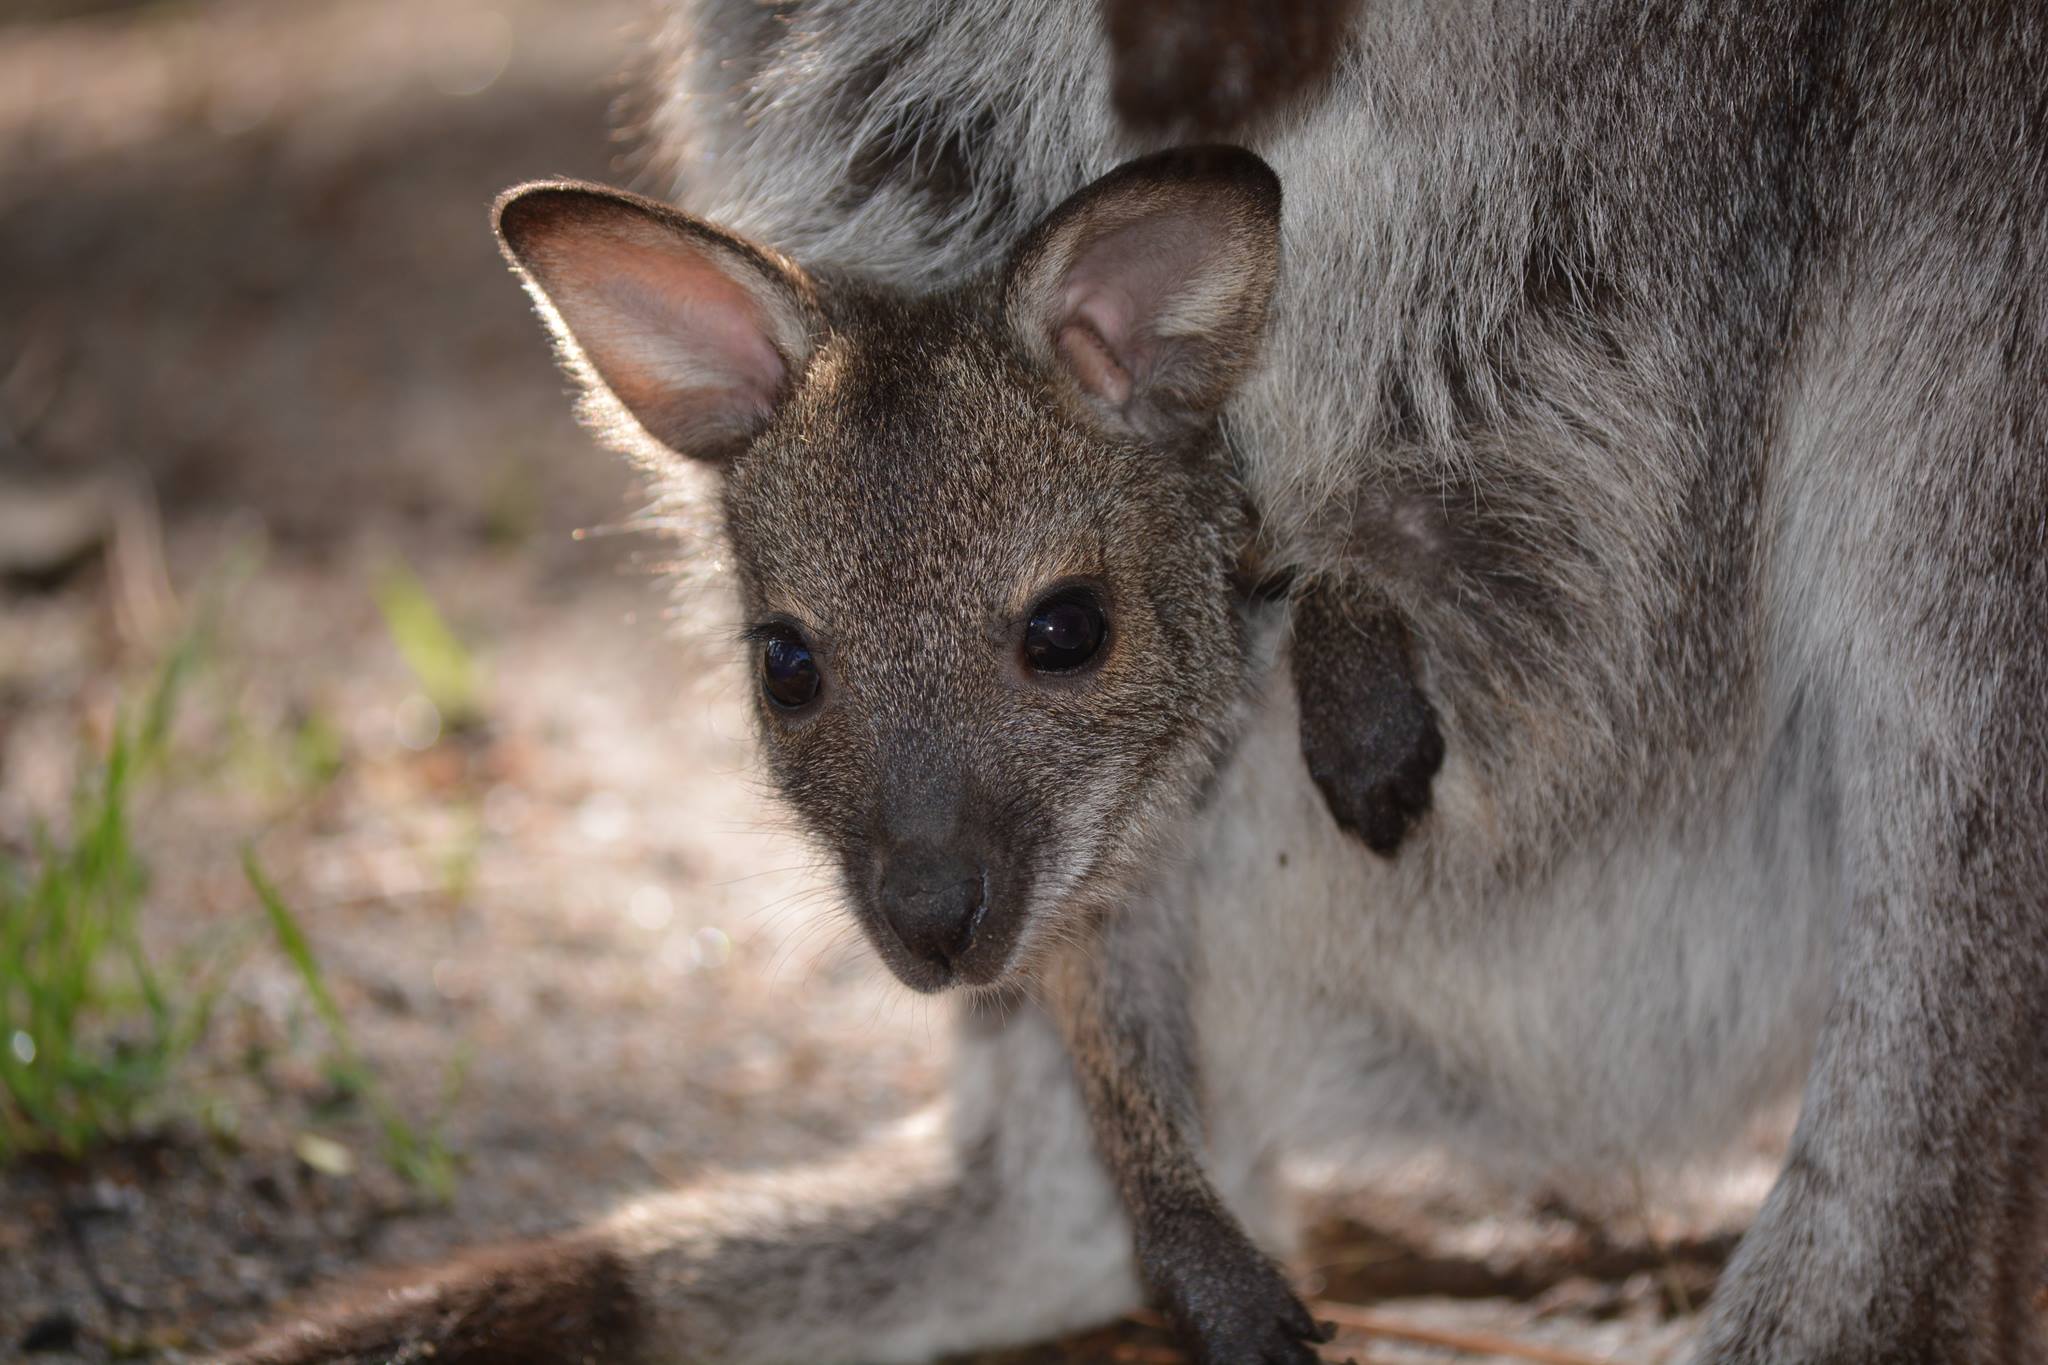 Red-necked wallaby joey looking out of its mother's pouch